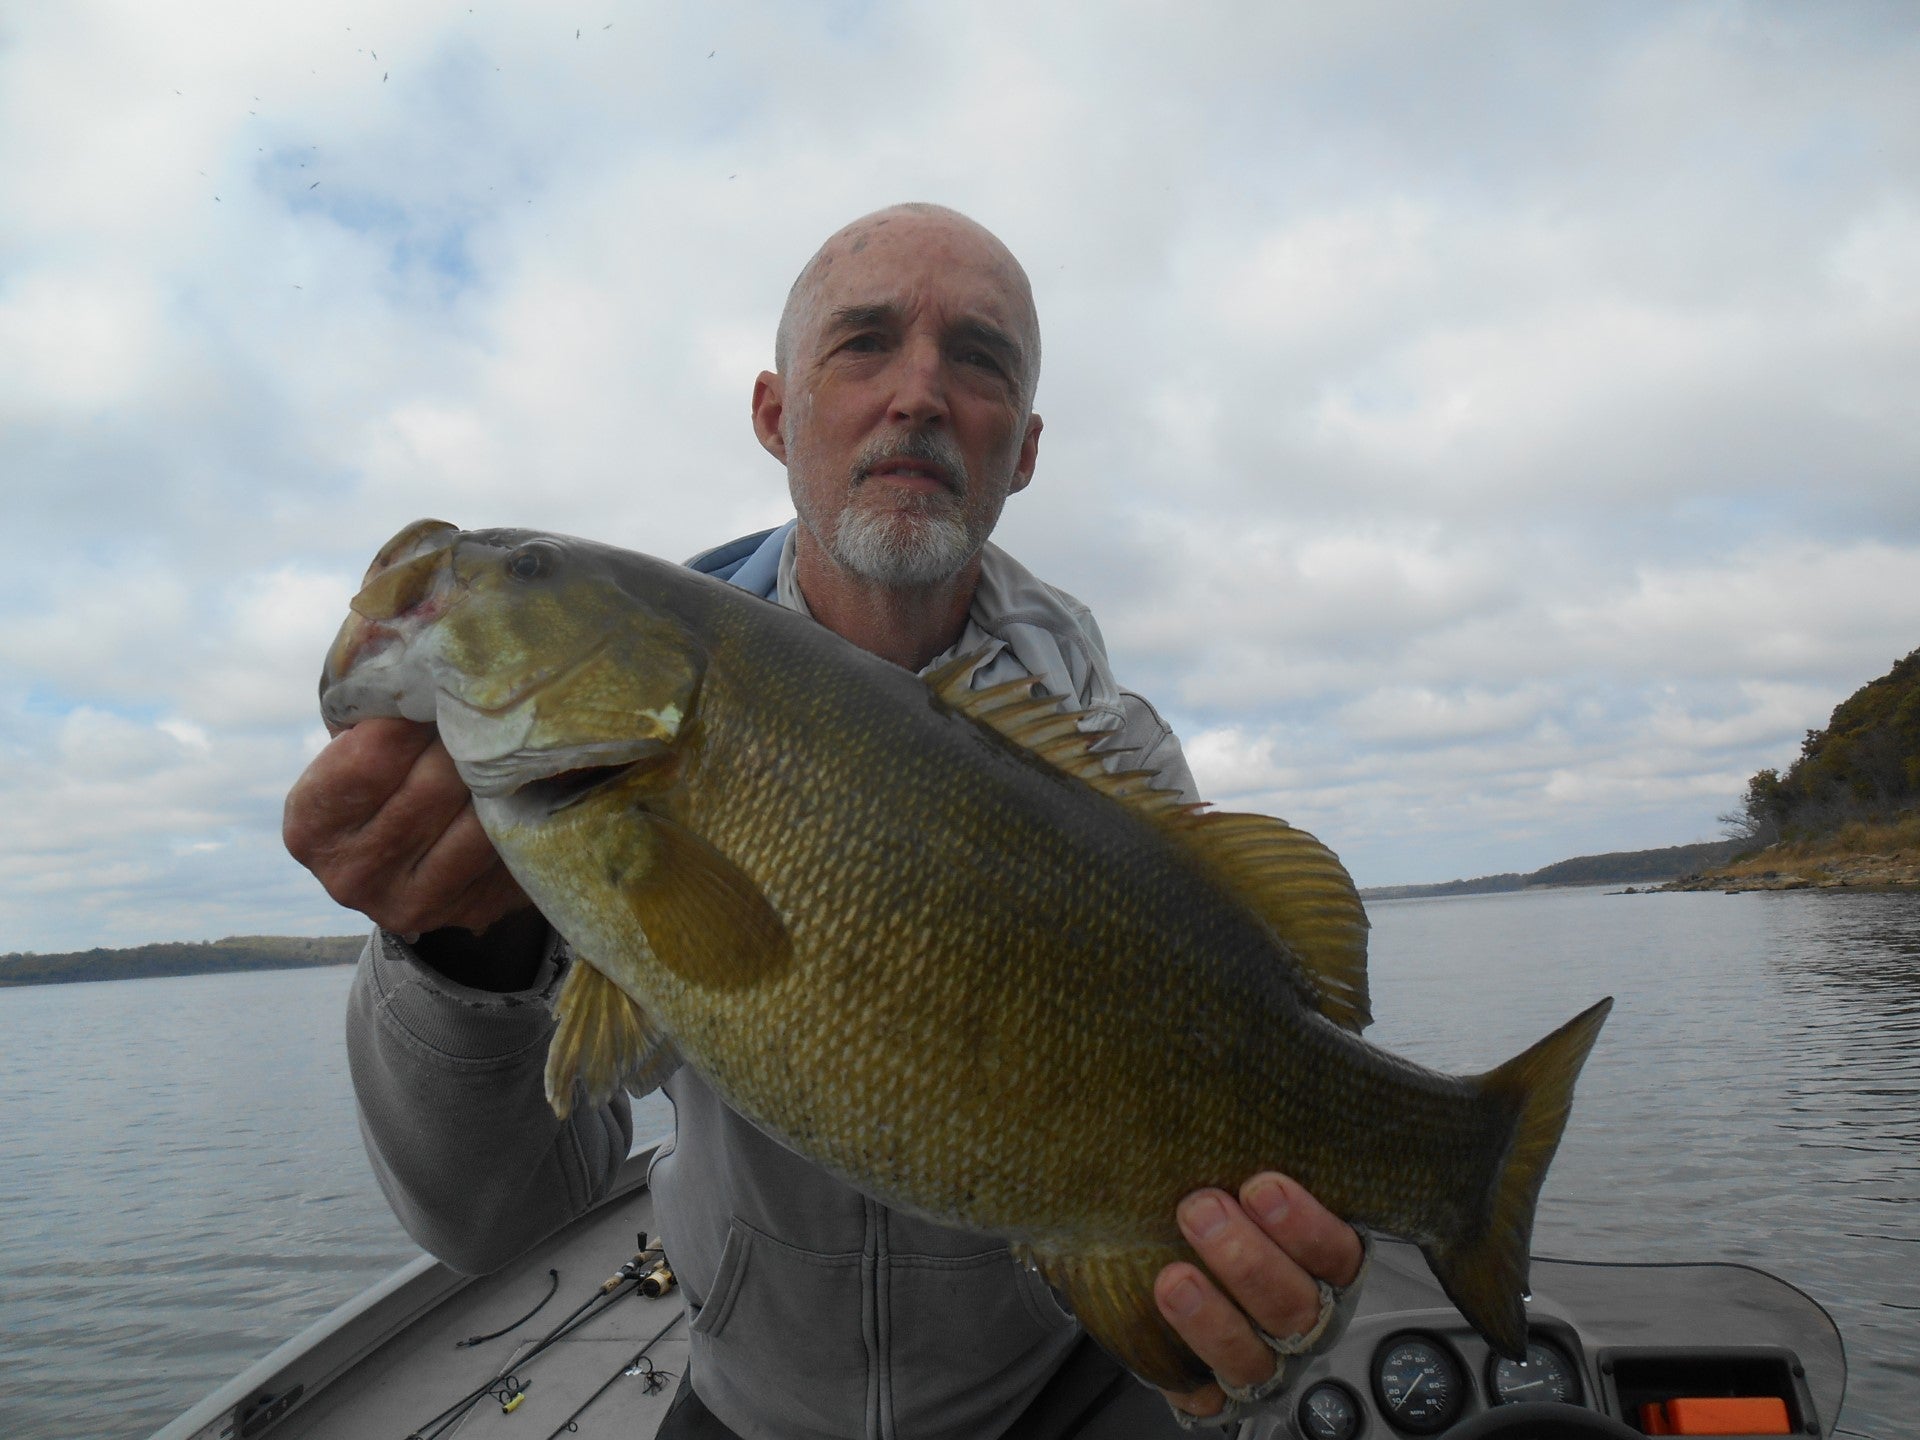 Bob Gum with a Small mouth bass